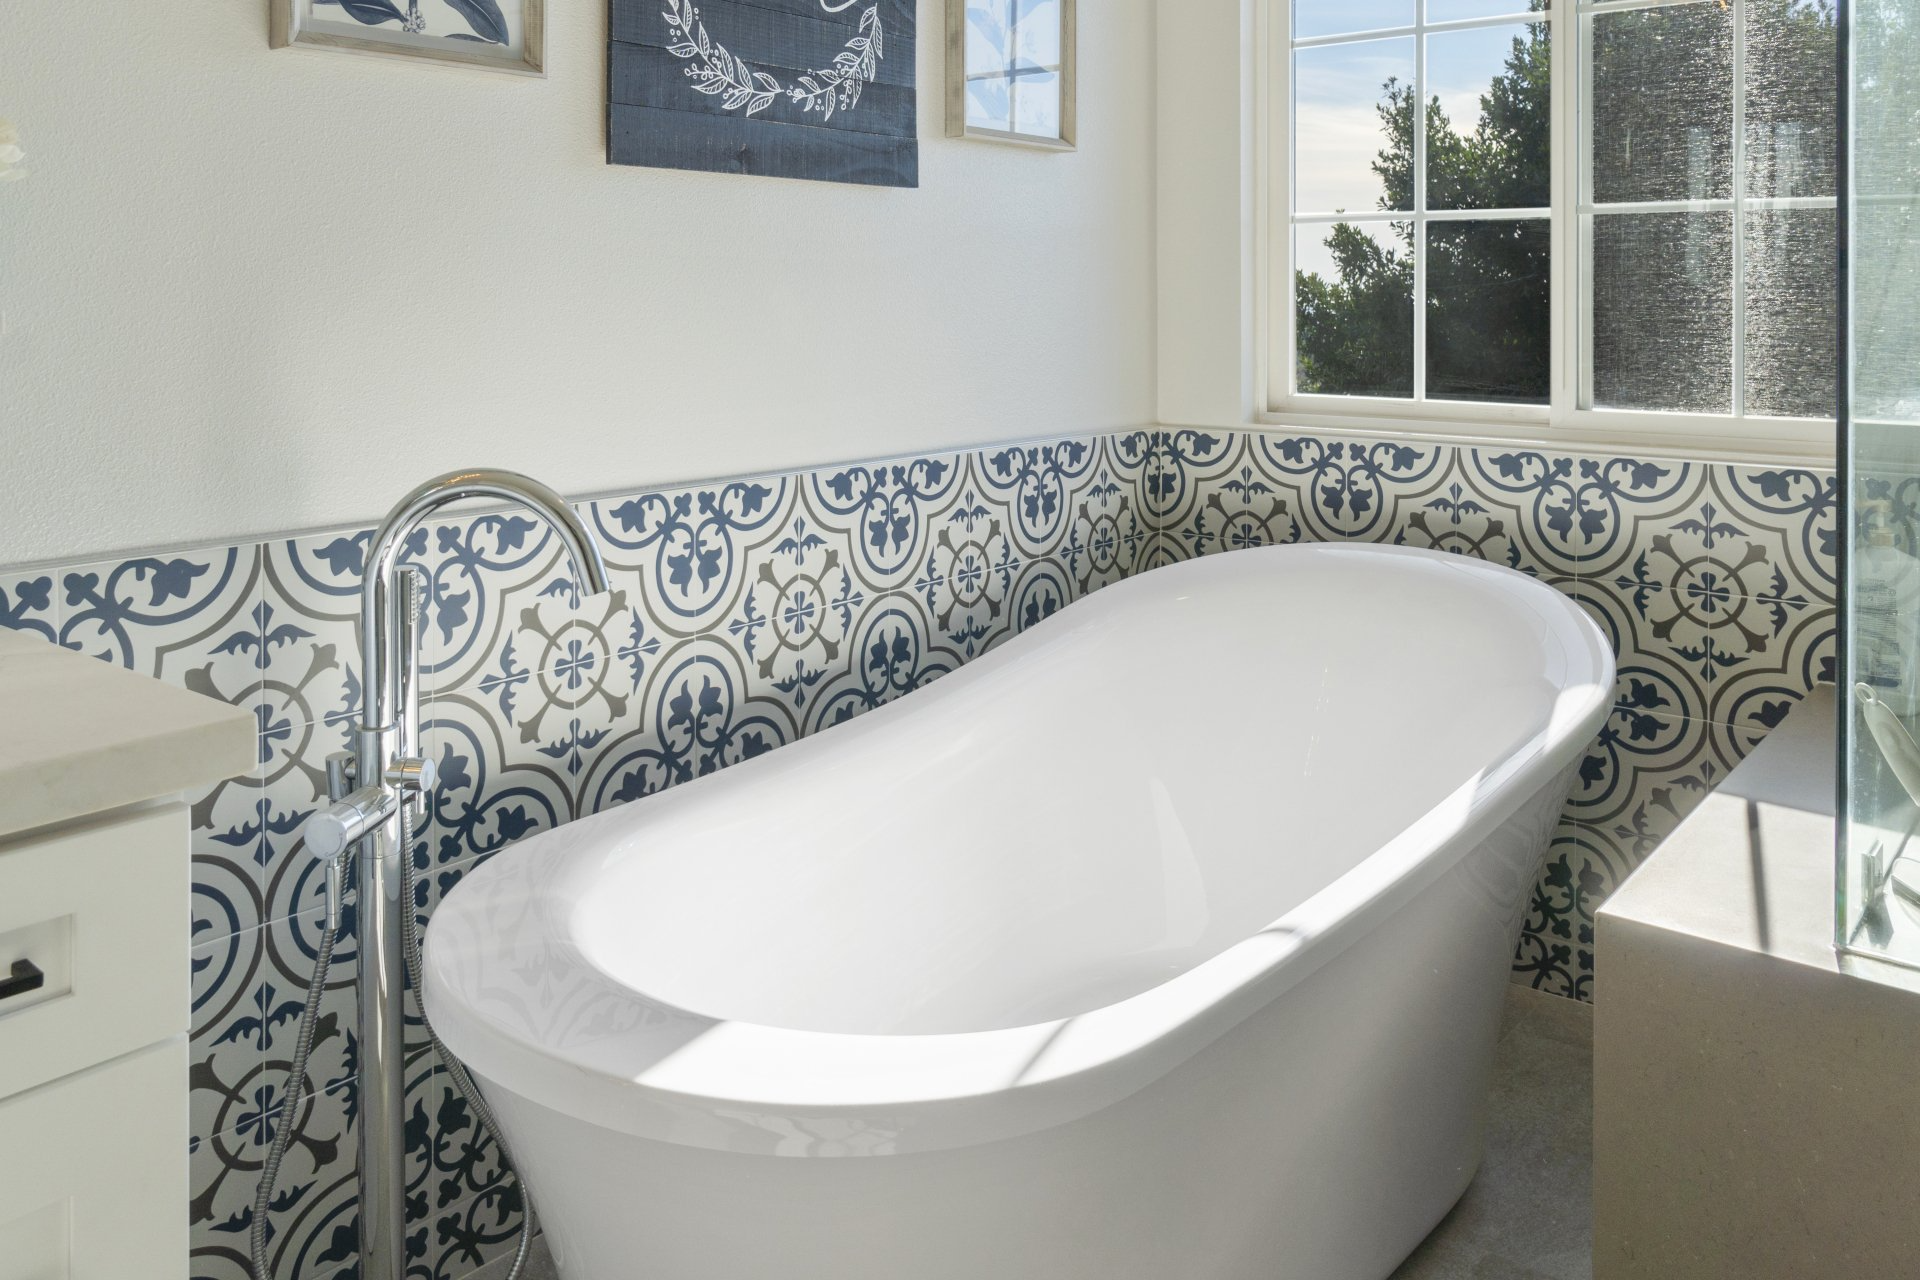 A bathtub is a key feature in any master bathroom that creates a spa-like atmosphere